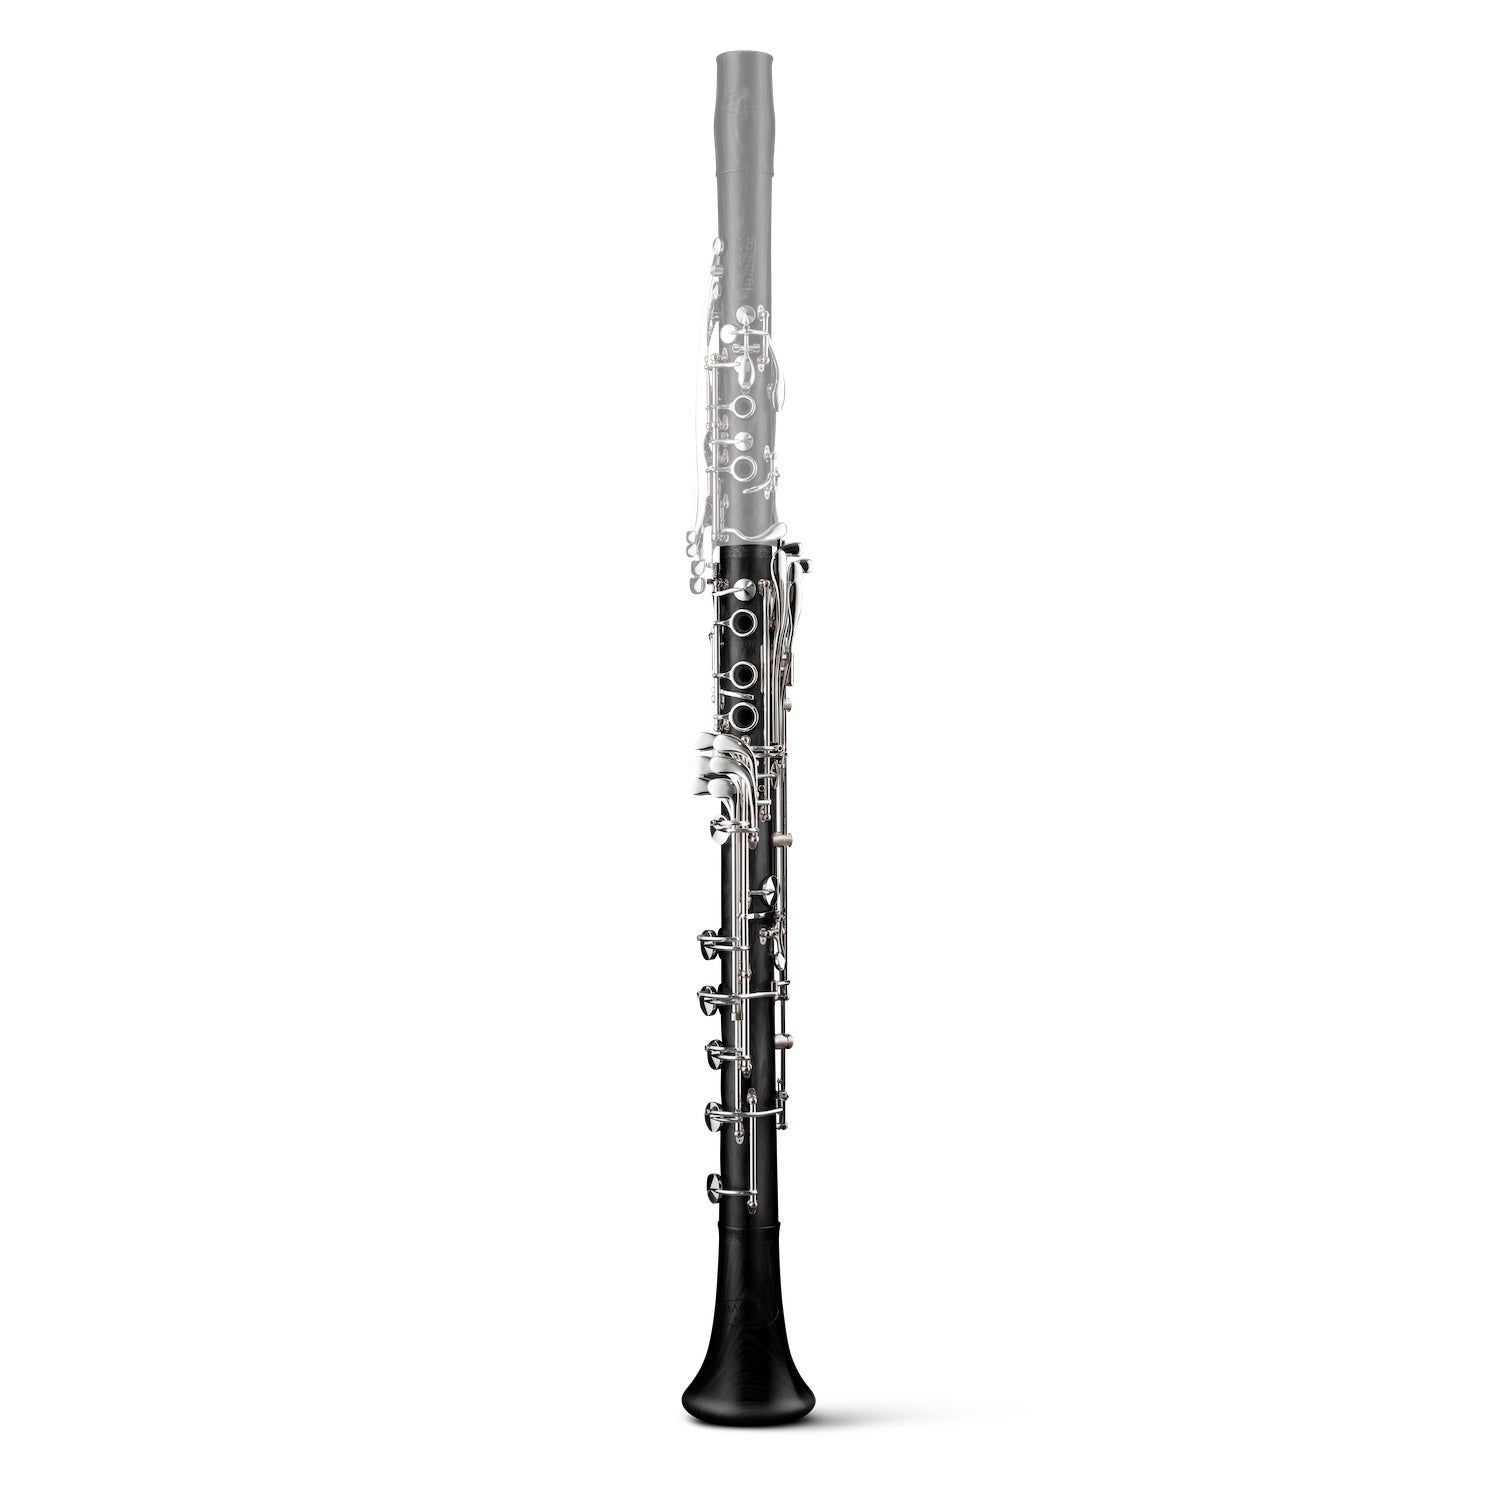 backun-lumiere-a-basset-clarinet-lower-joint-grenadilla-silver-front